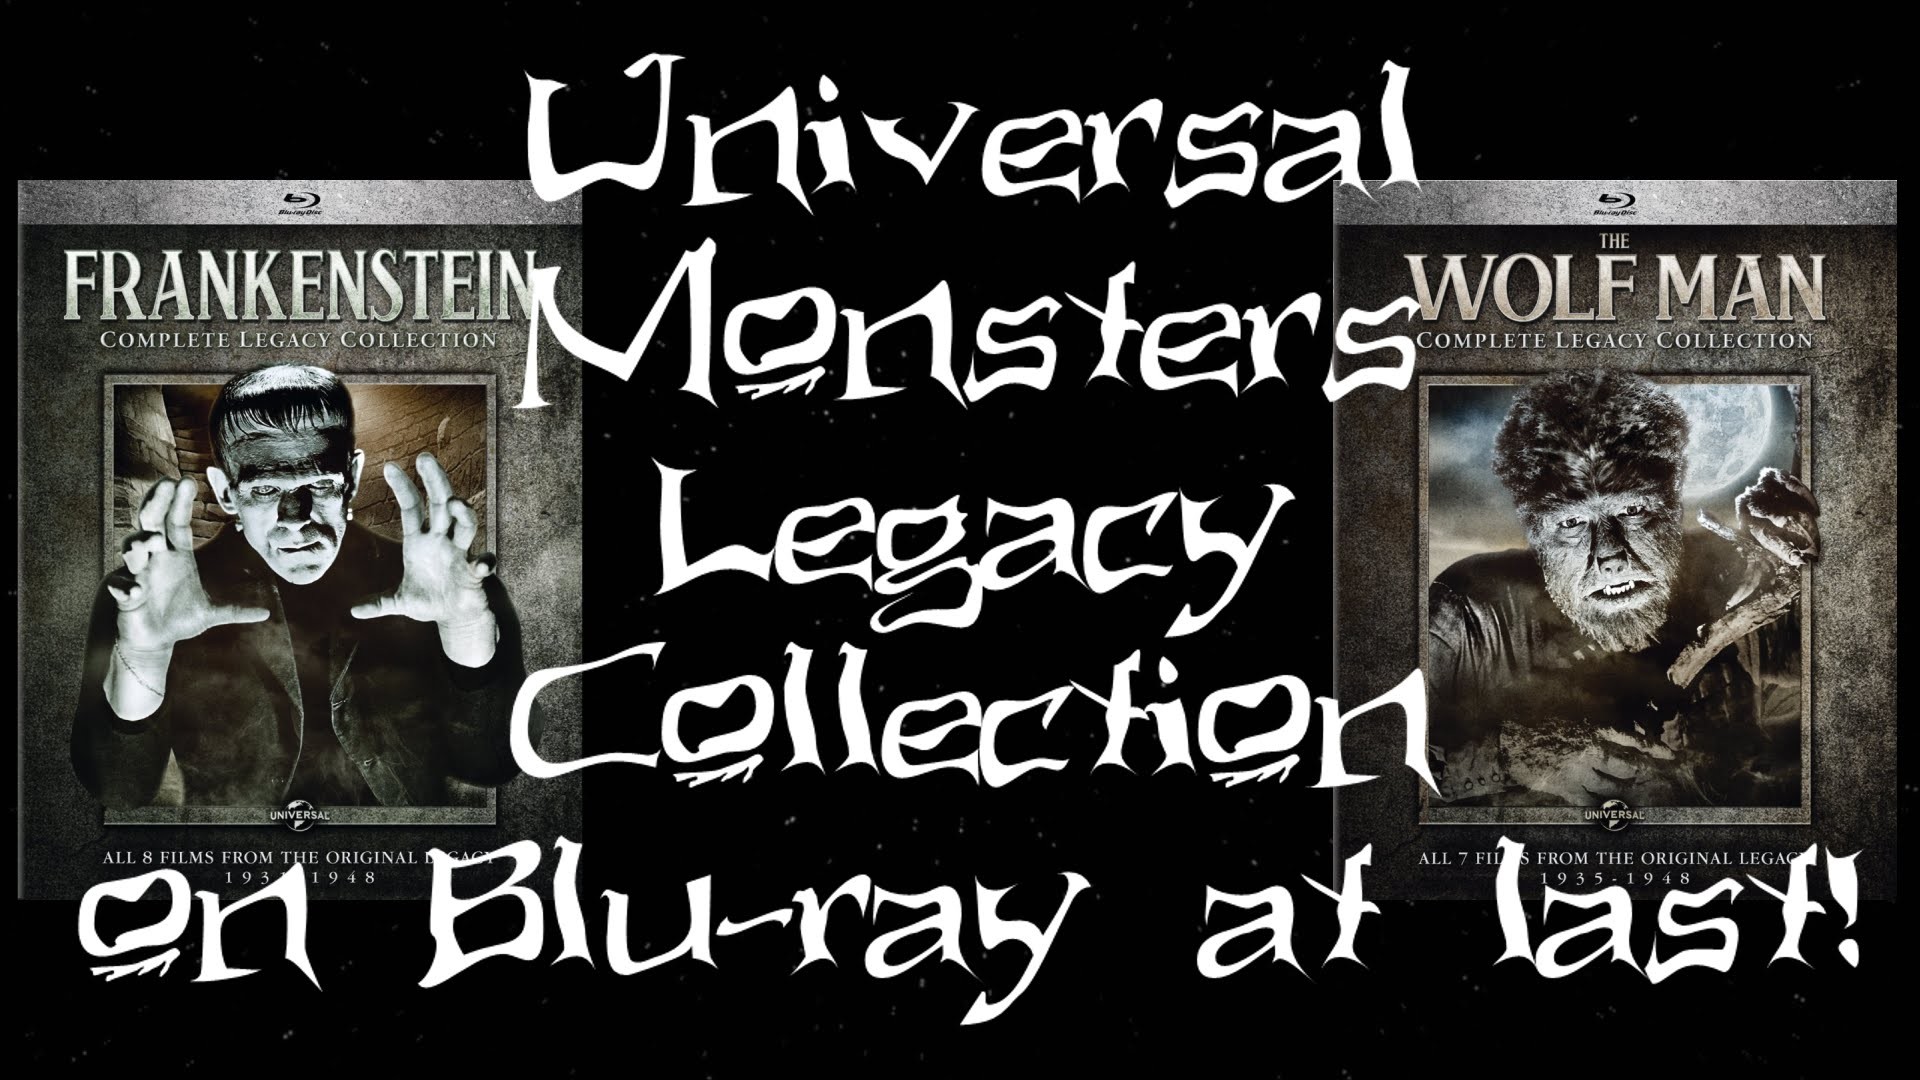 1920x1080 Universal Monsters Legacy Collection on Blu-ray AT LAST!